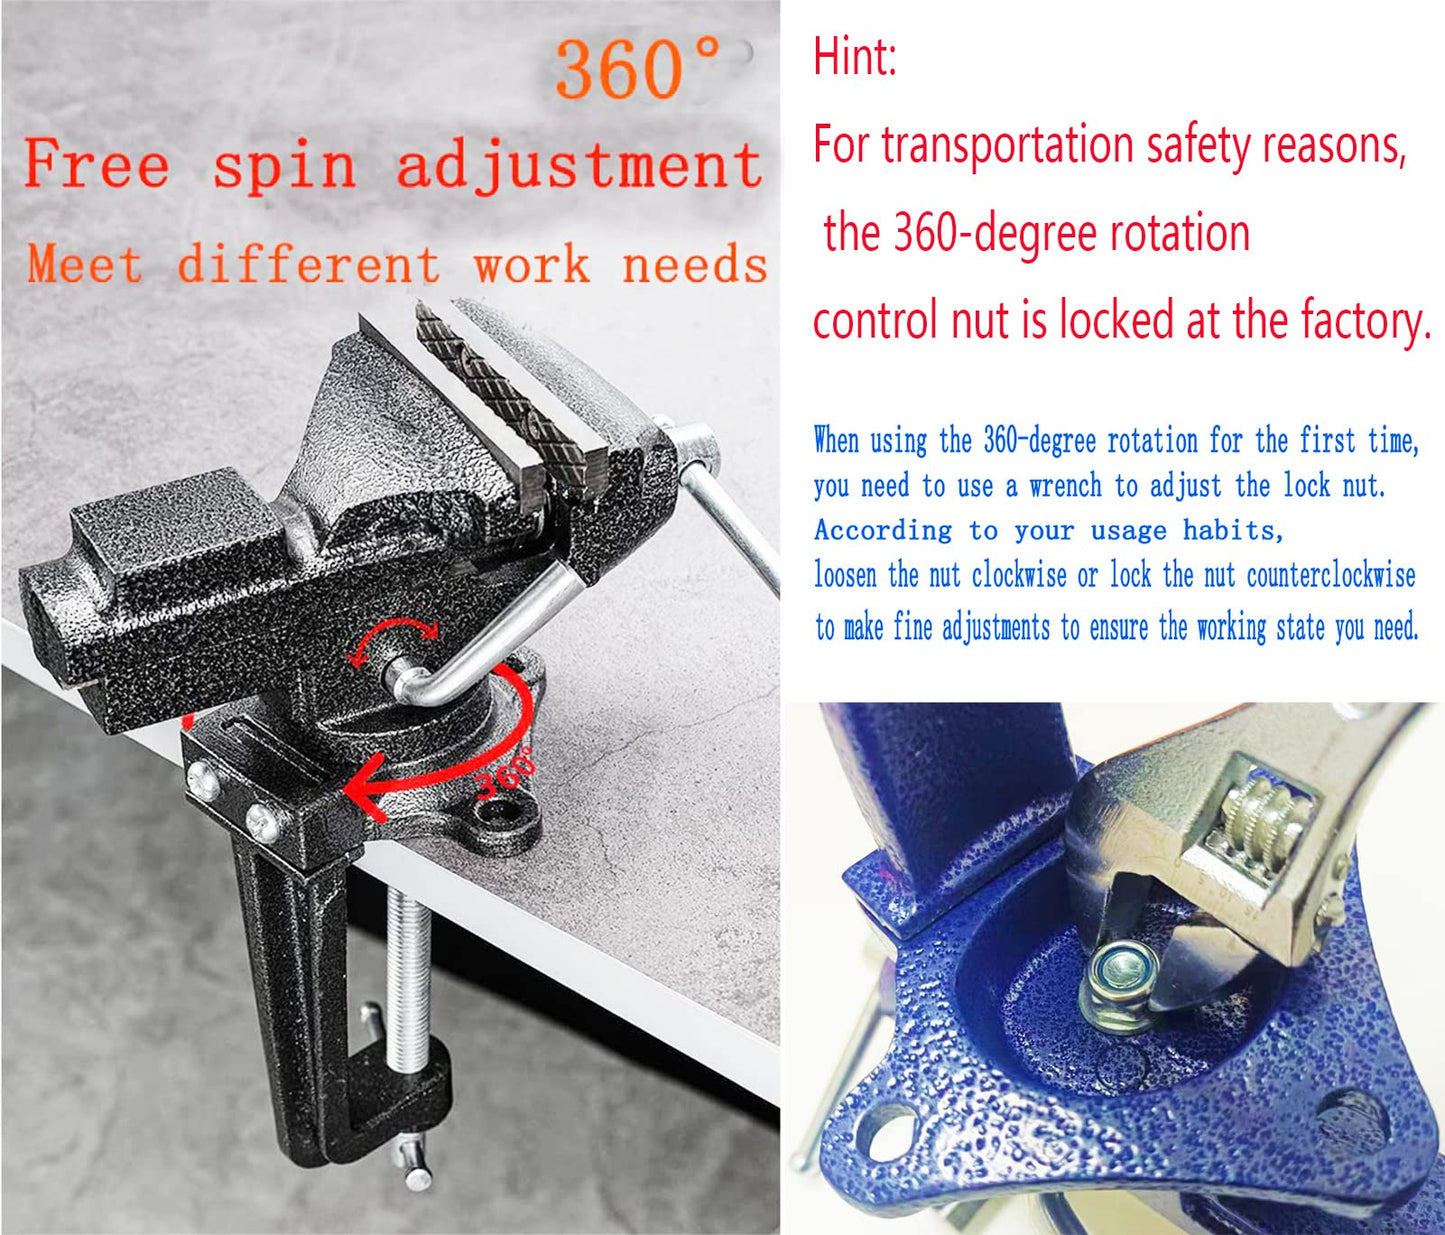 2-in-1 Dual-Purpose Combined Bench Vise or Table Vise with end-locking arrangement; Portable Universal Rotate 360° Work Clamp-On Vise, 2.5" Black